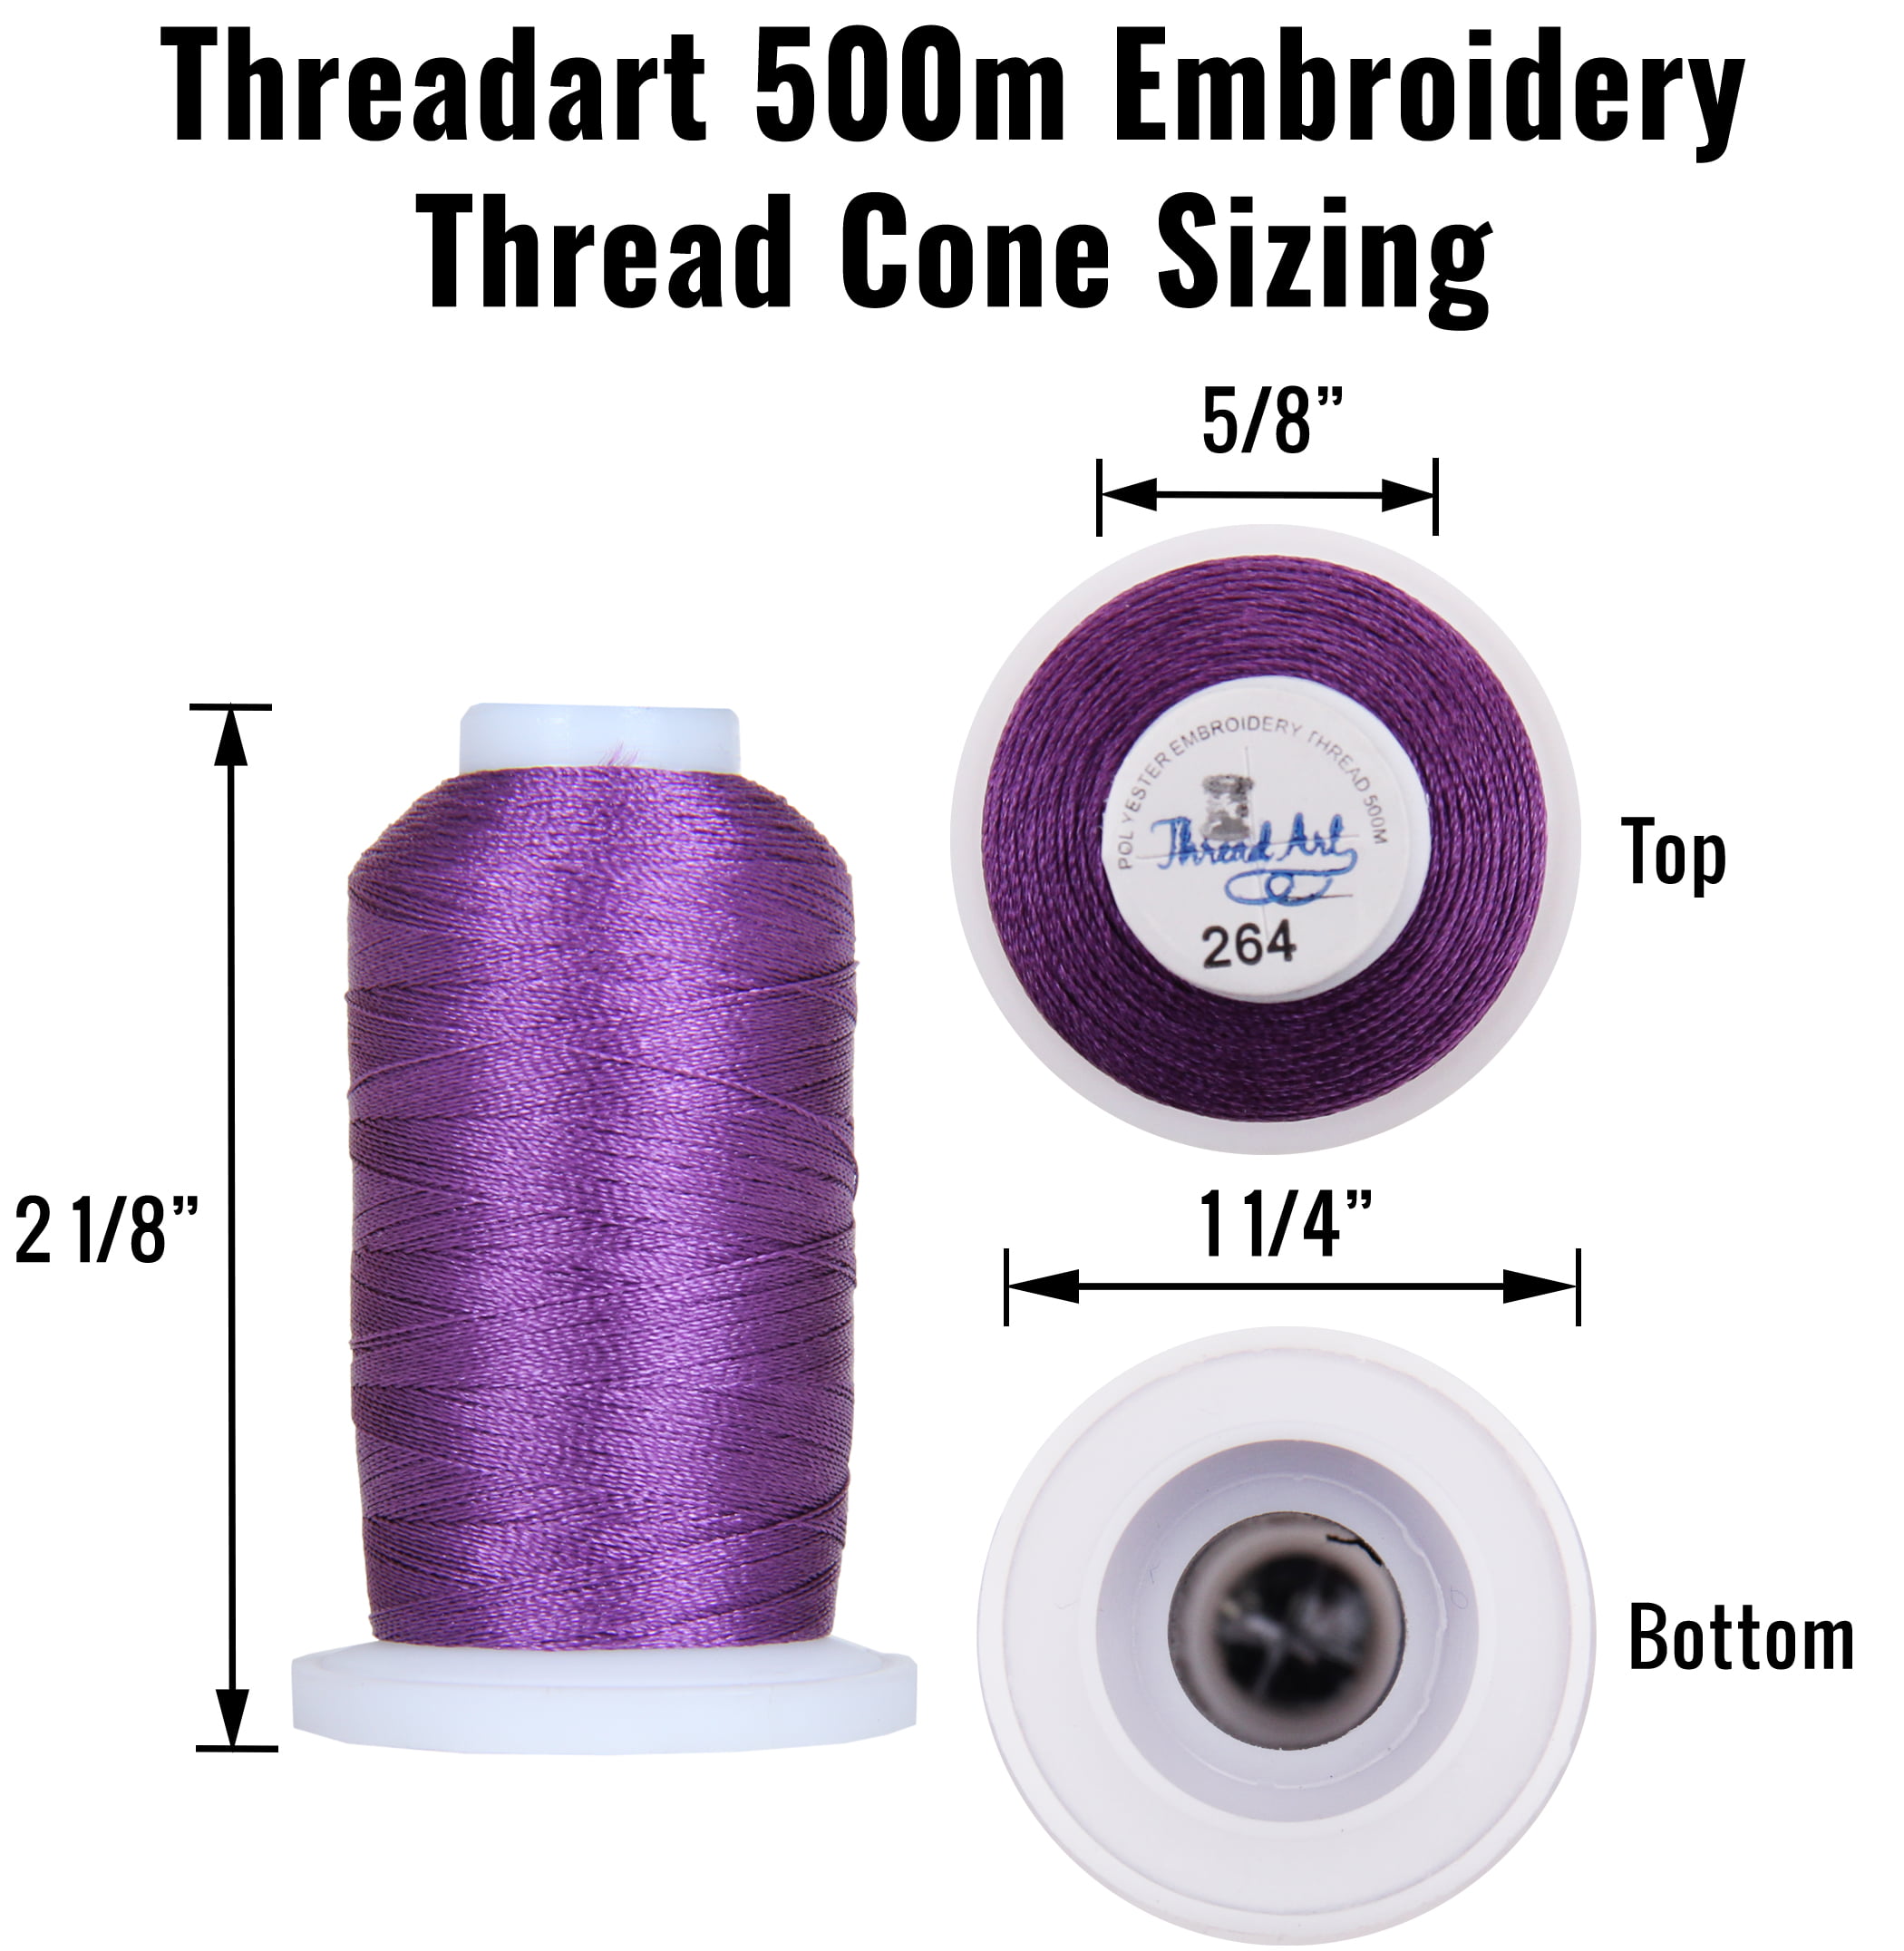 10 Sets Available For Brother Babylock Janome Singer Pfaff Husqvarna Bernina Machines 1000M Spools 40wt Threadart 20 Spool Polyester Embroidery Machine Thread Pastel Colors 